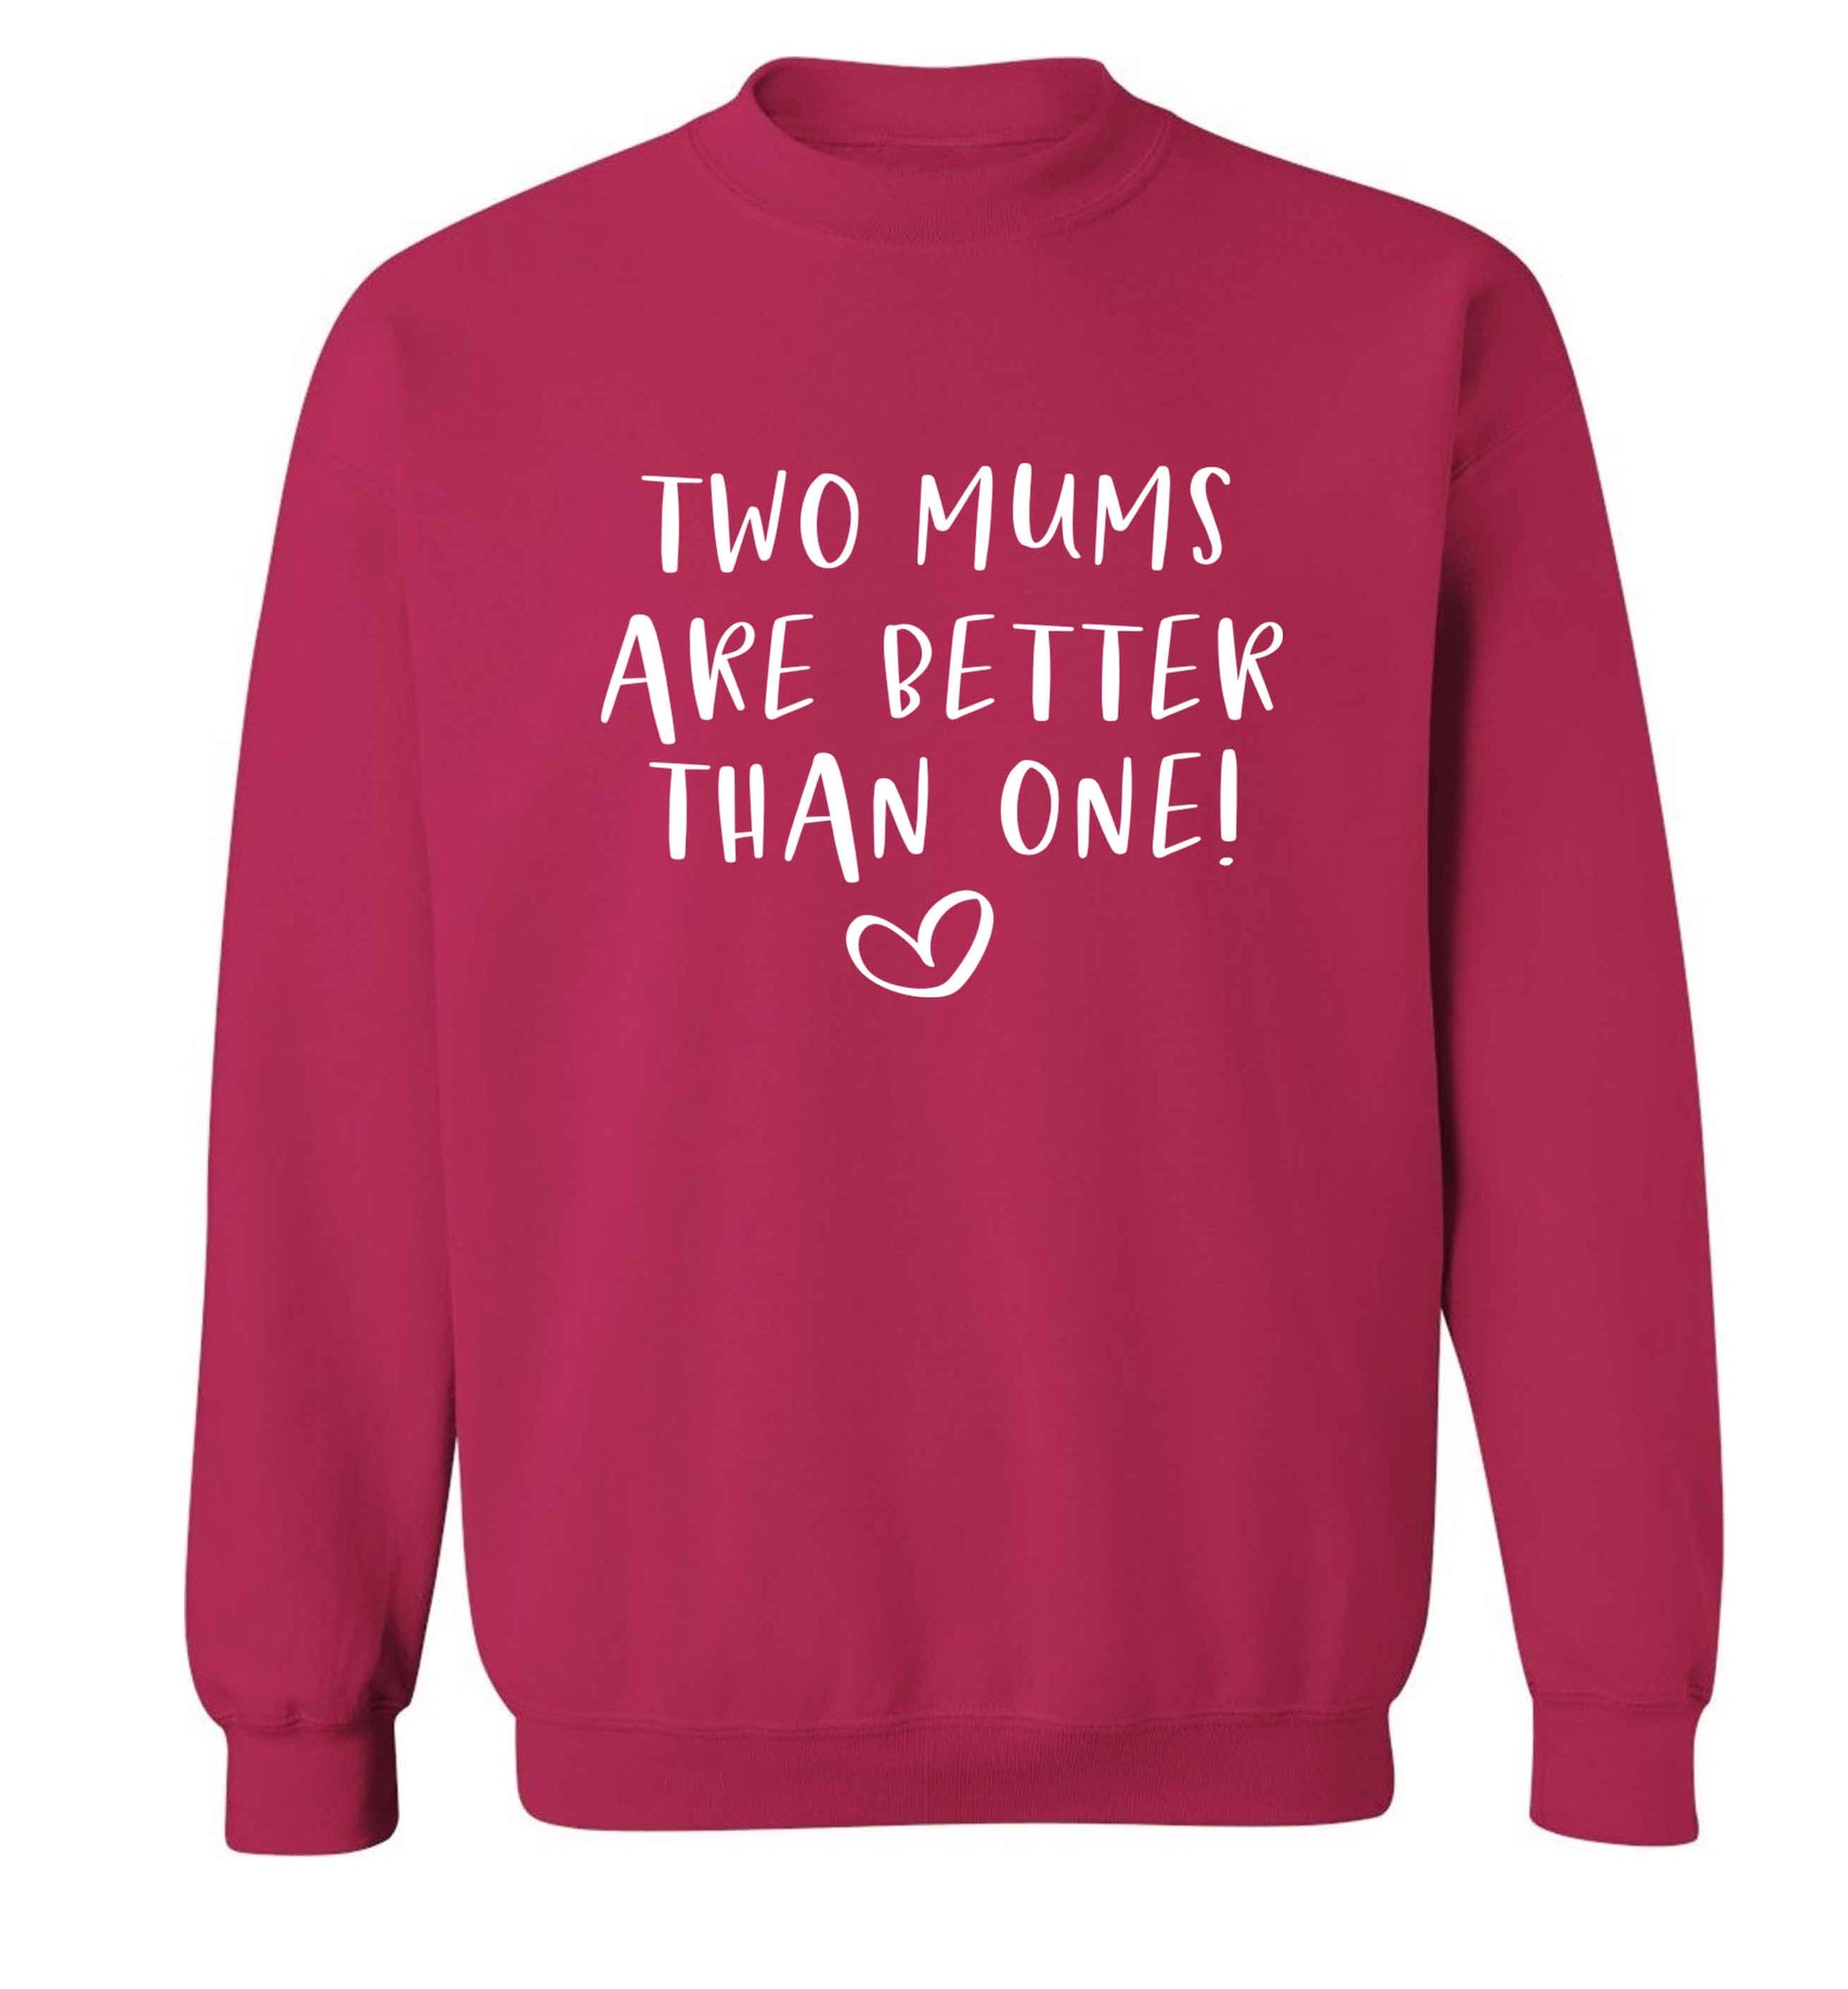 Two mums are better than one adult's unisex pink sweater 2XL